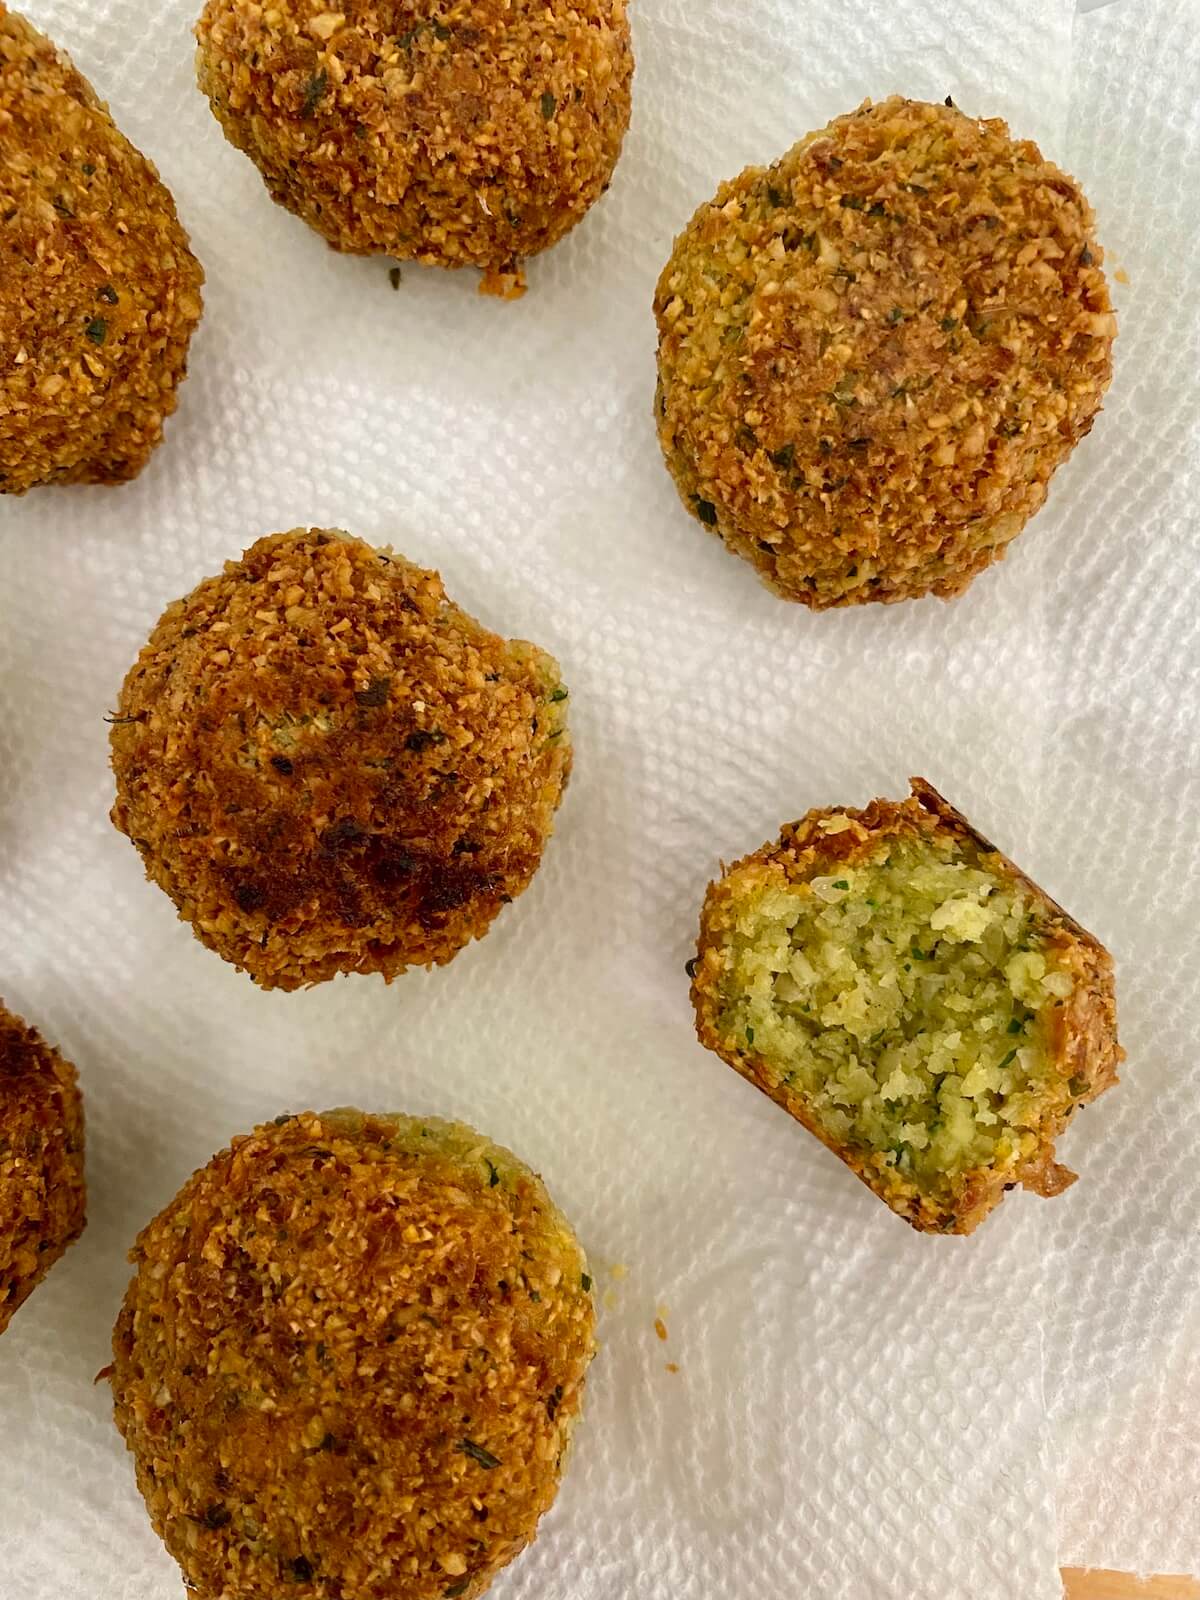 Cooked falafel draining on paper towels. One of the falafel balls has a bite taken out of it.